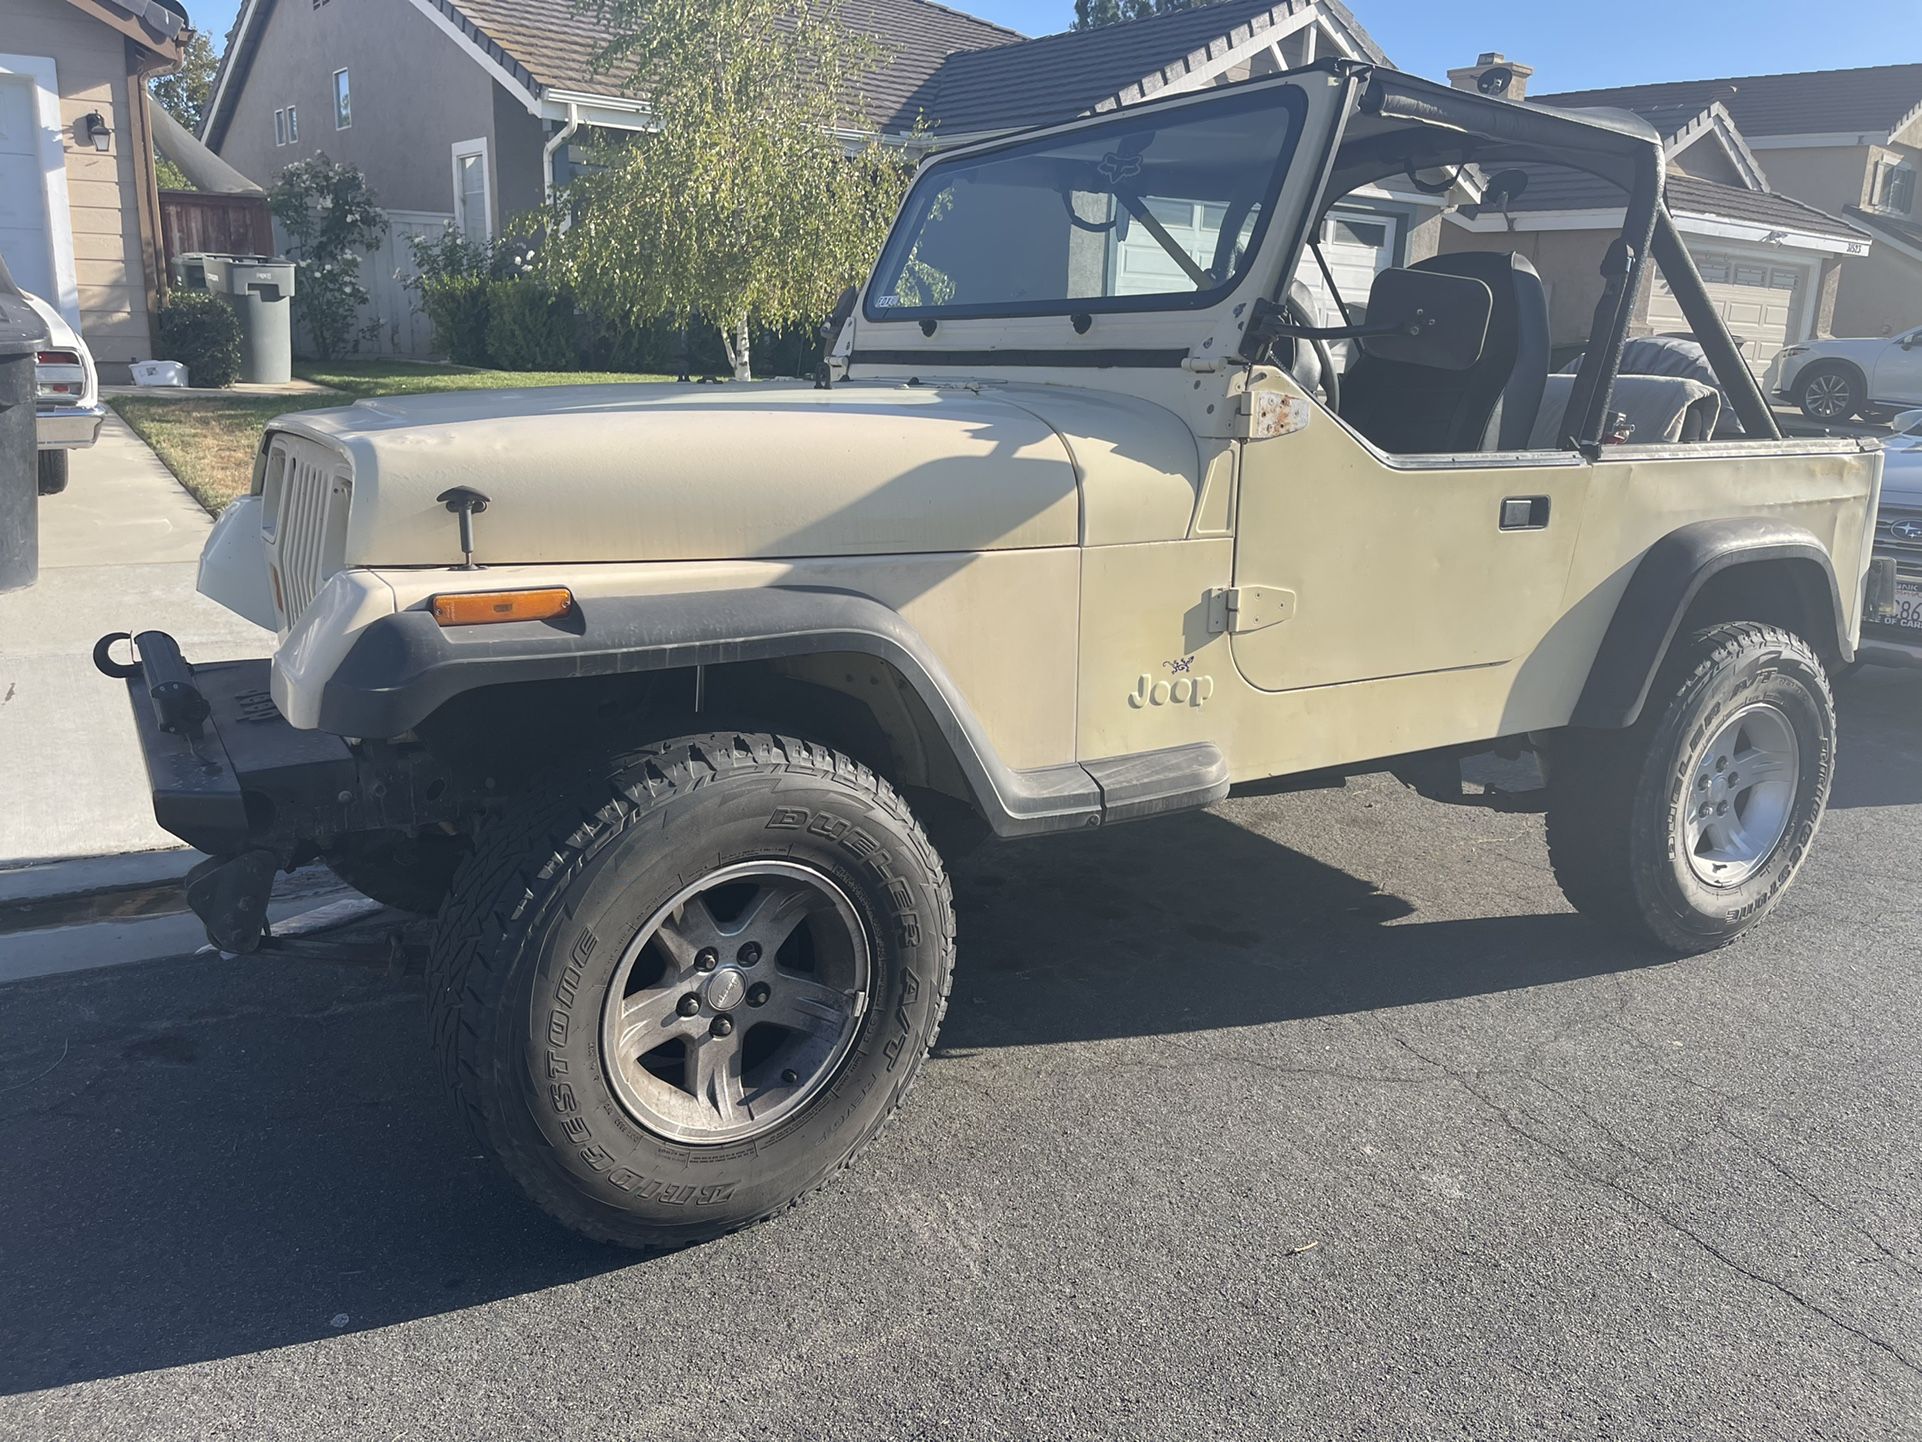 1988 Jeep Wrangler for Sale in Temecula, CA - OfferUp